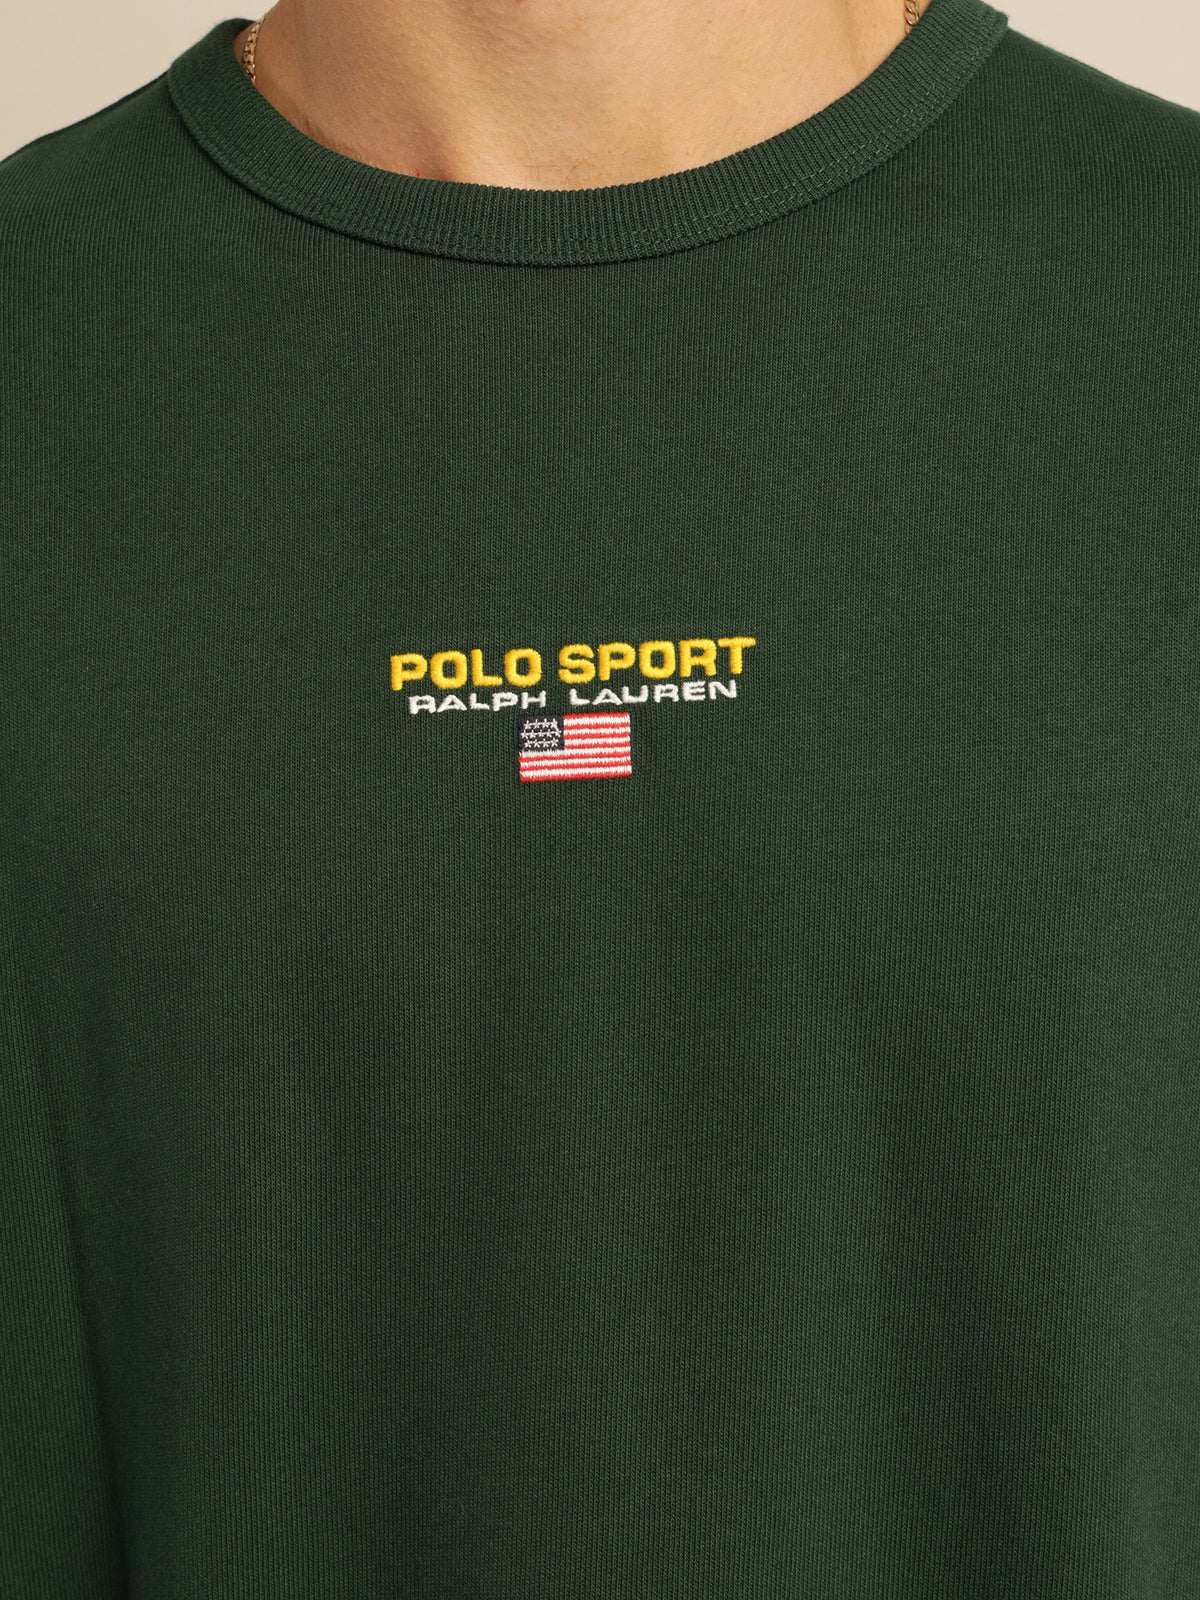 Polo Sport Jersey in College Green